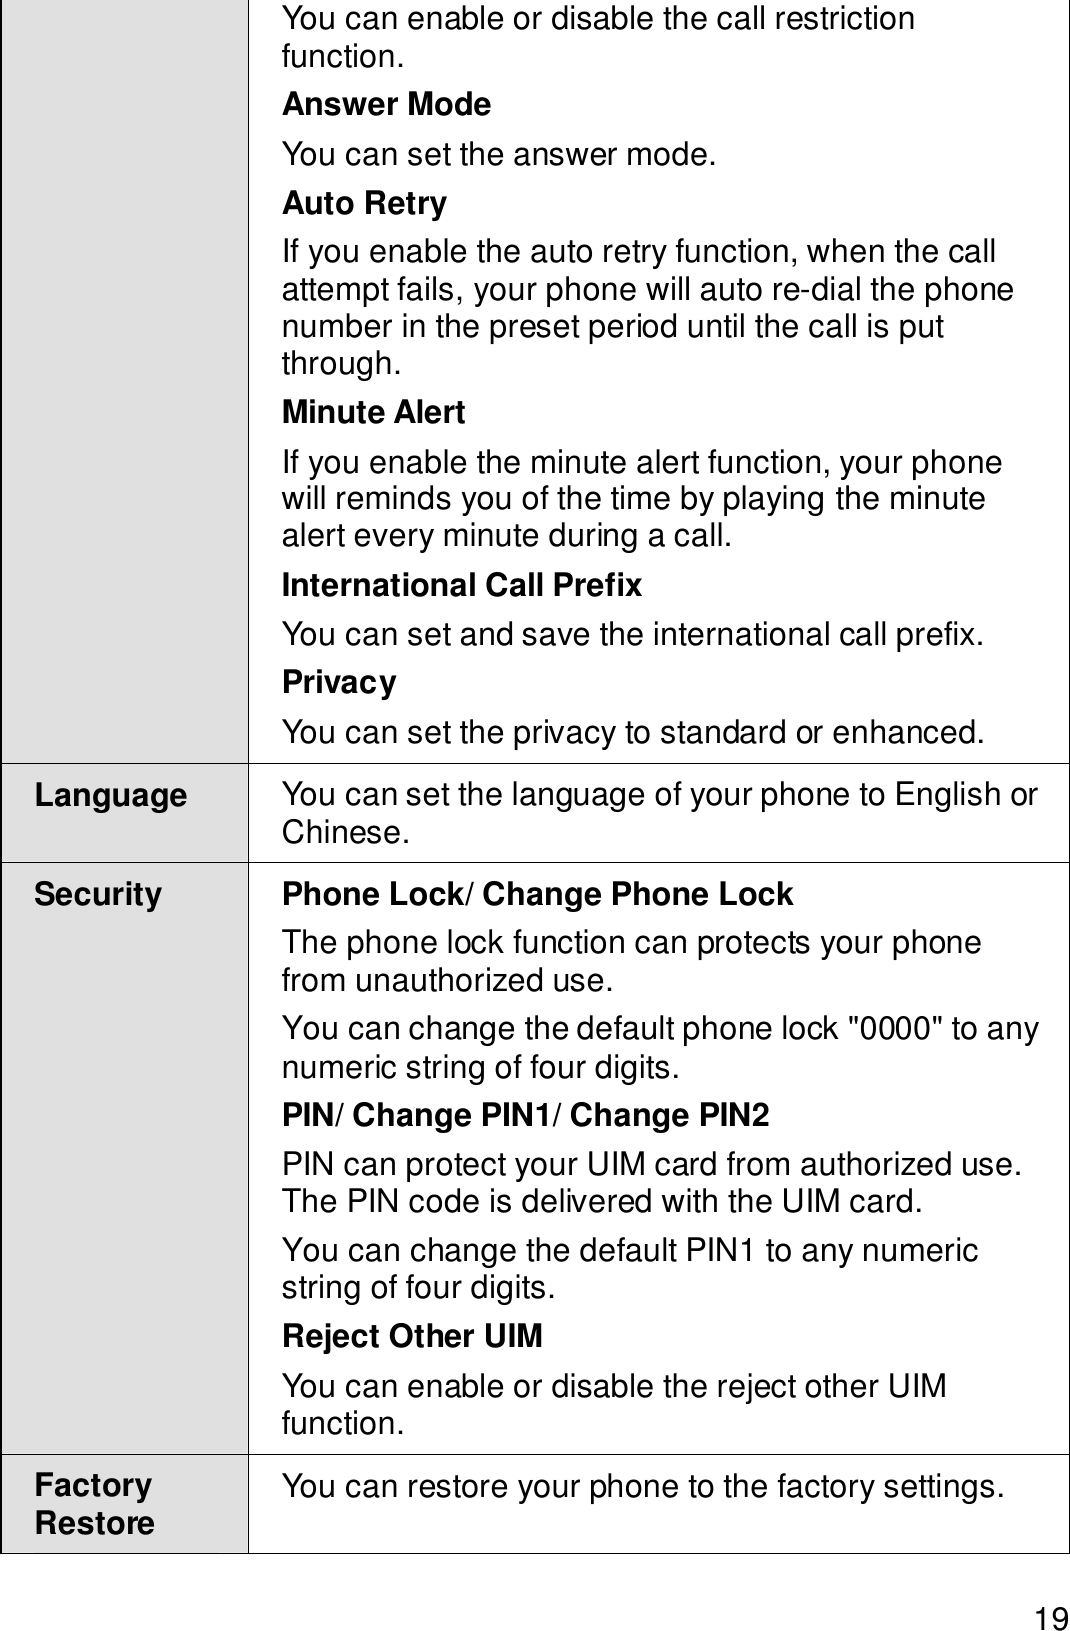  19 You can enable or disable the call restriction function. Answer Mode You can set the answer mode. Auto Retry If you enable the auto retry function, when the call attempt fails, your phone will auto re-dial the phone number in the preset period until the call is put through. Minute Alert If you enable the minute alert function, your phone will reminds you of the time by playing the minute alert every minute during a call. International Call Prefix You can set and save the international call prefix. Privacy You can set the privacy to standard or enhanced. Language  You can set the language of your phone to English or Chinese. Security  Phone Lock/ Change Phone Lock The phone lock function can protects your phone from unauthorized use. You can change the default phone lock &quot;0000&quot; to any numeric string of four digits. PIN/ Change PIN1/ Change PIN2 PIN can protect your UIM card from authorized use. The PIN code is delivered with the UIM card. You can change the default PIN1 to any numeric string of four digits. Reject Other UIM You can enable or disable the reject other UIM function. Factory Restore  You can restore your phone to the factory settings. 